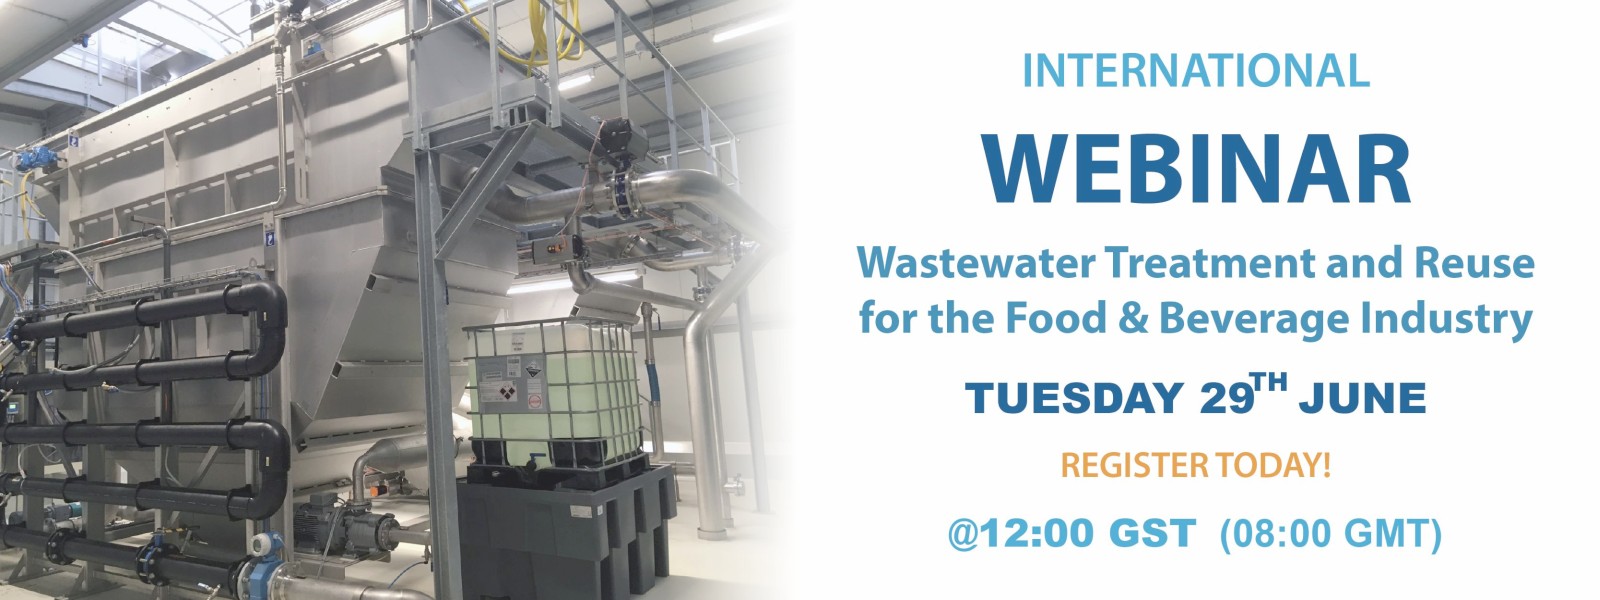 Webinar: Wastewater Treatment and Reuse for the Food & Beverage Industry